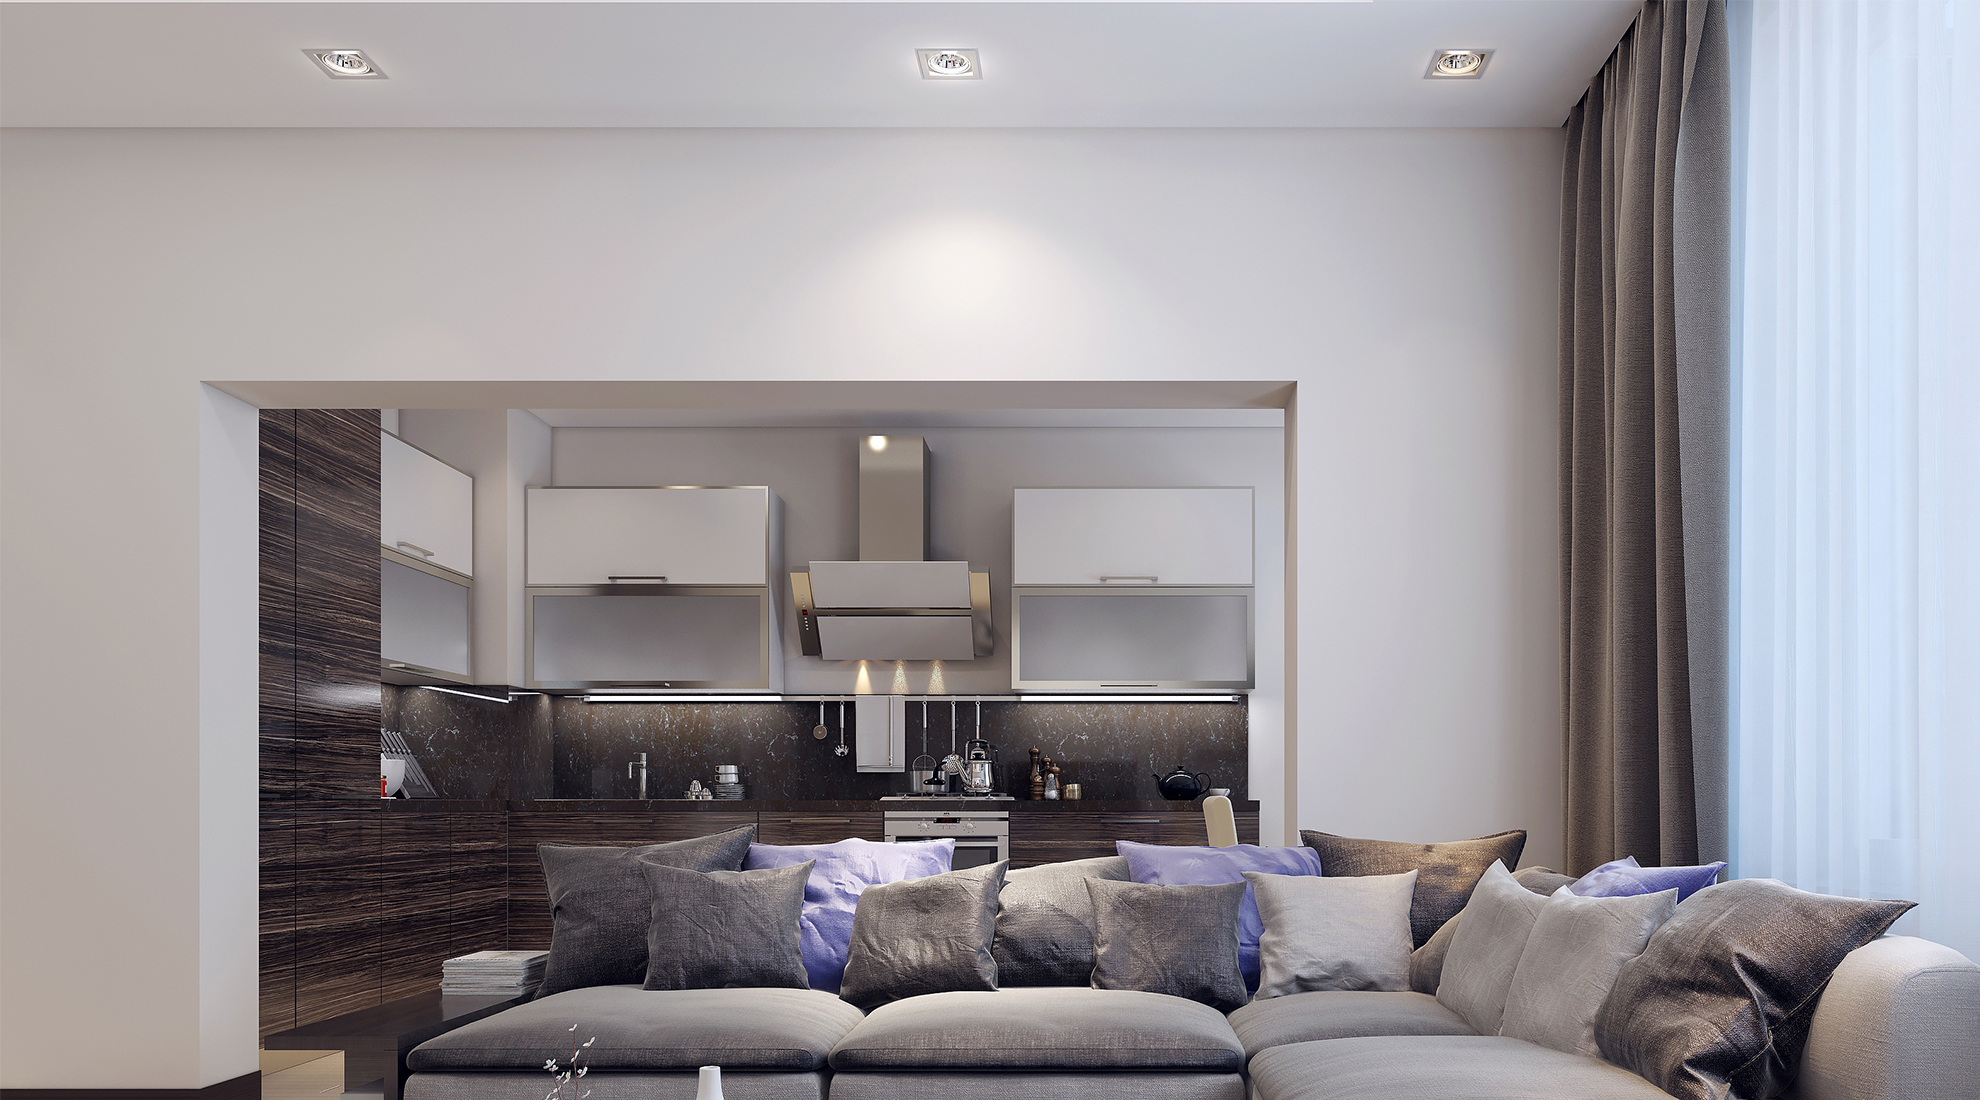 How To Recessed Lighting At Lumens Com, How To Choose Recessed Lighting For Living Room